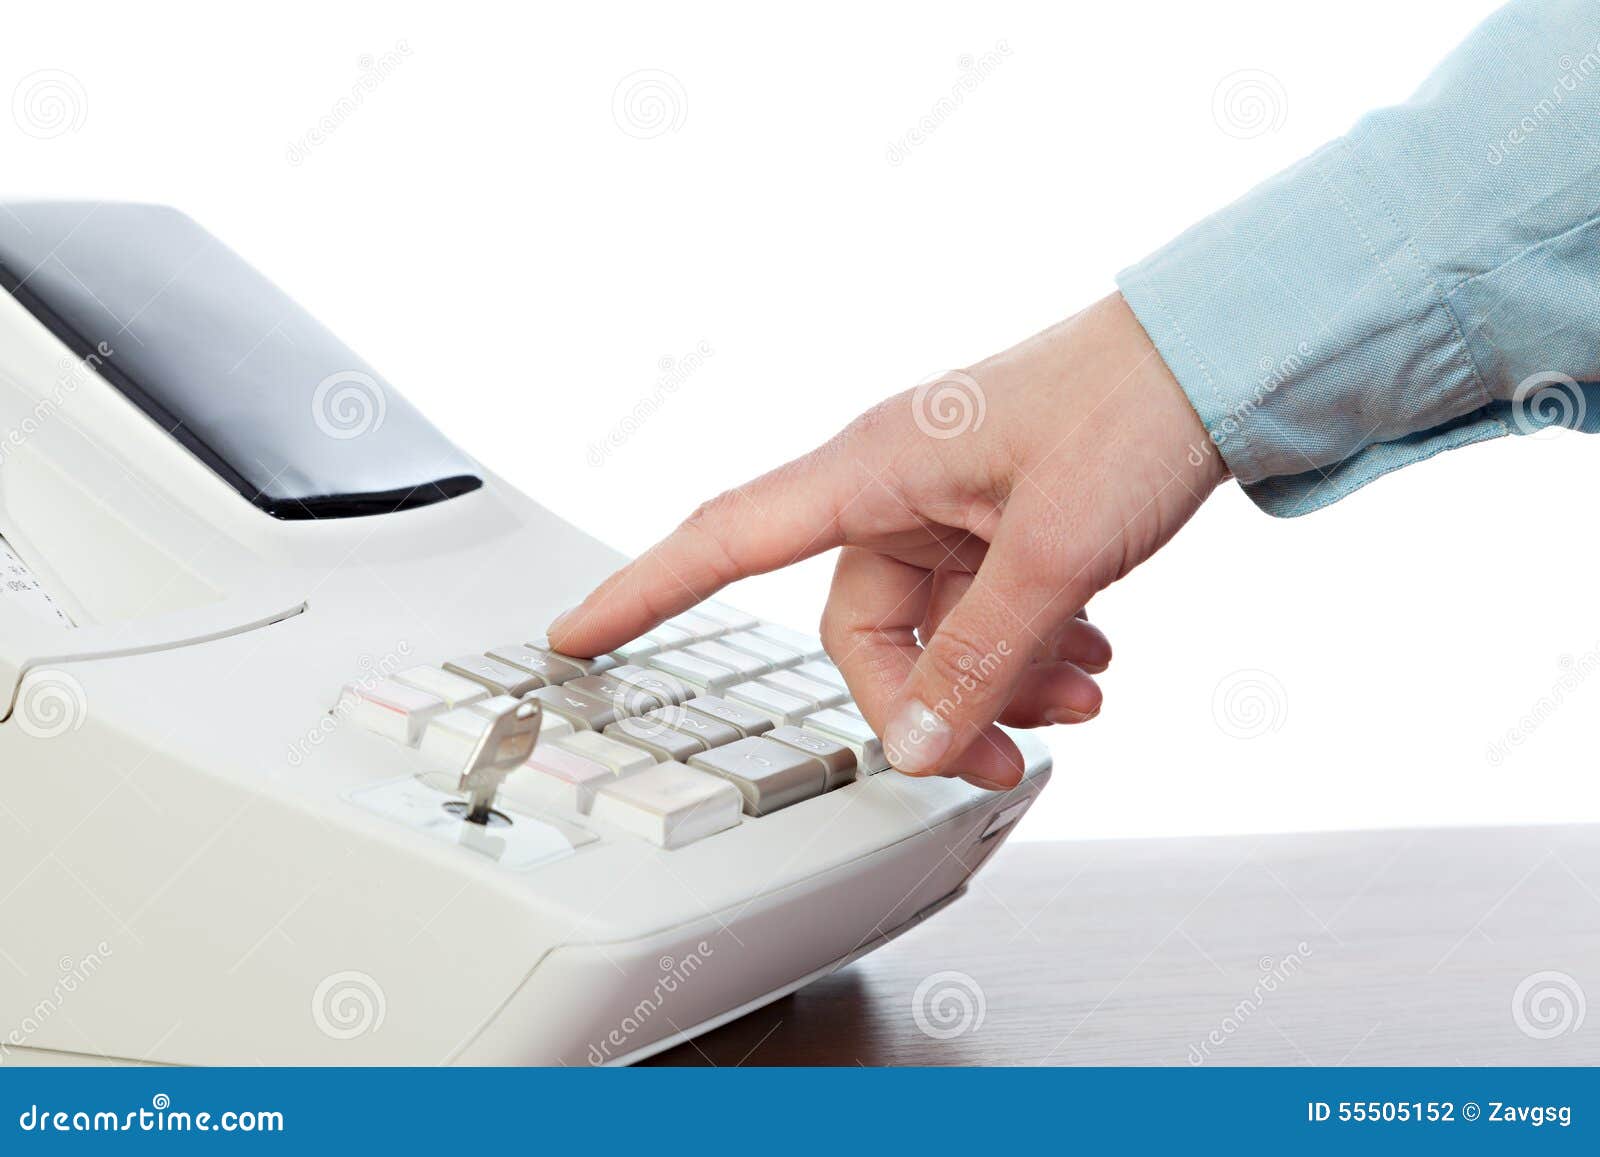 sales person entering amount on cash register in retail store